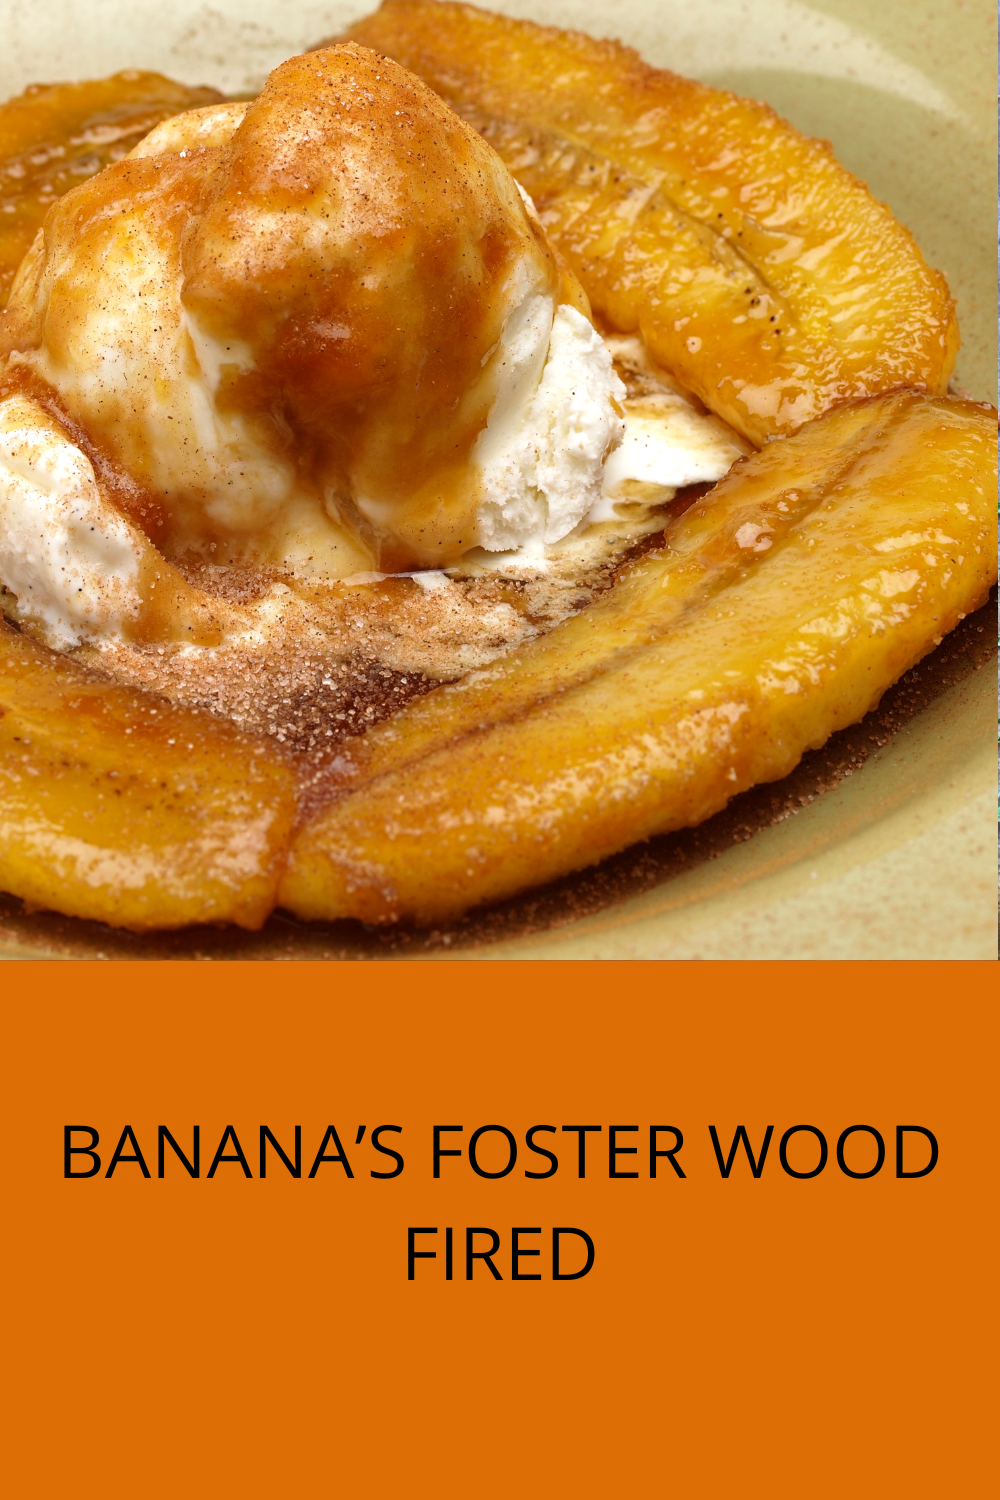 BANANA’S FOSTER WOOD FIRED